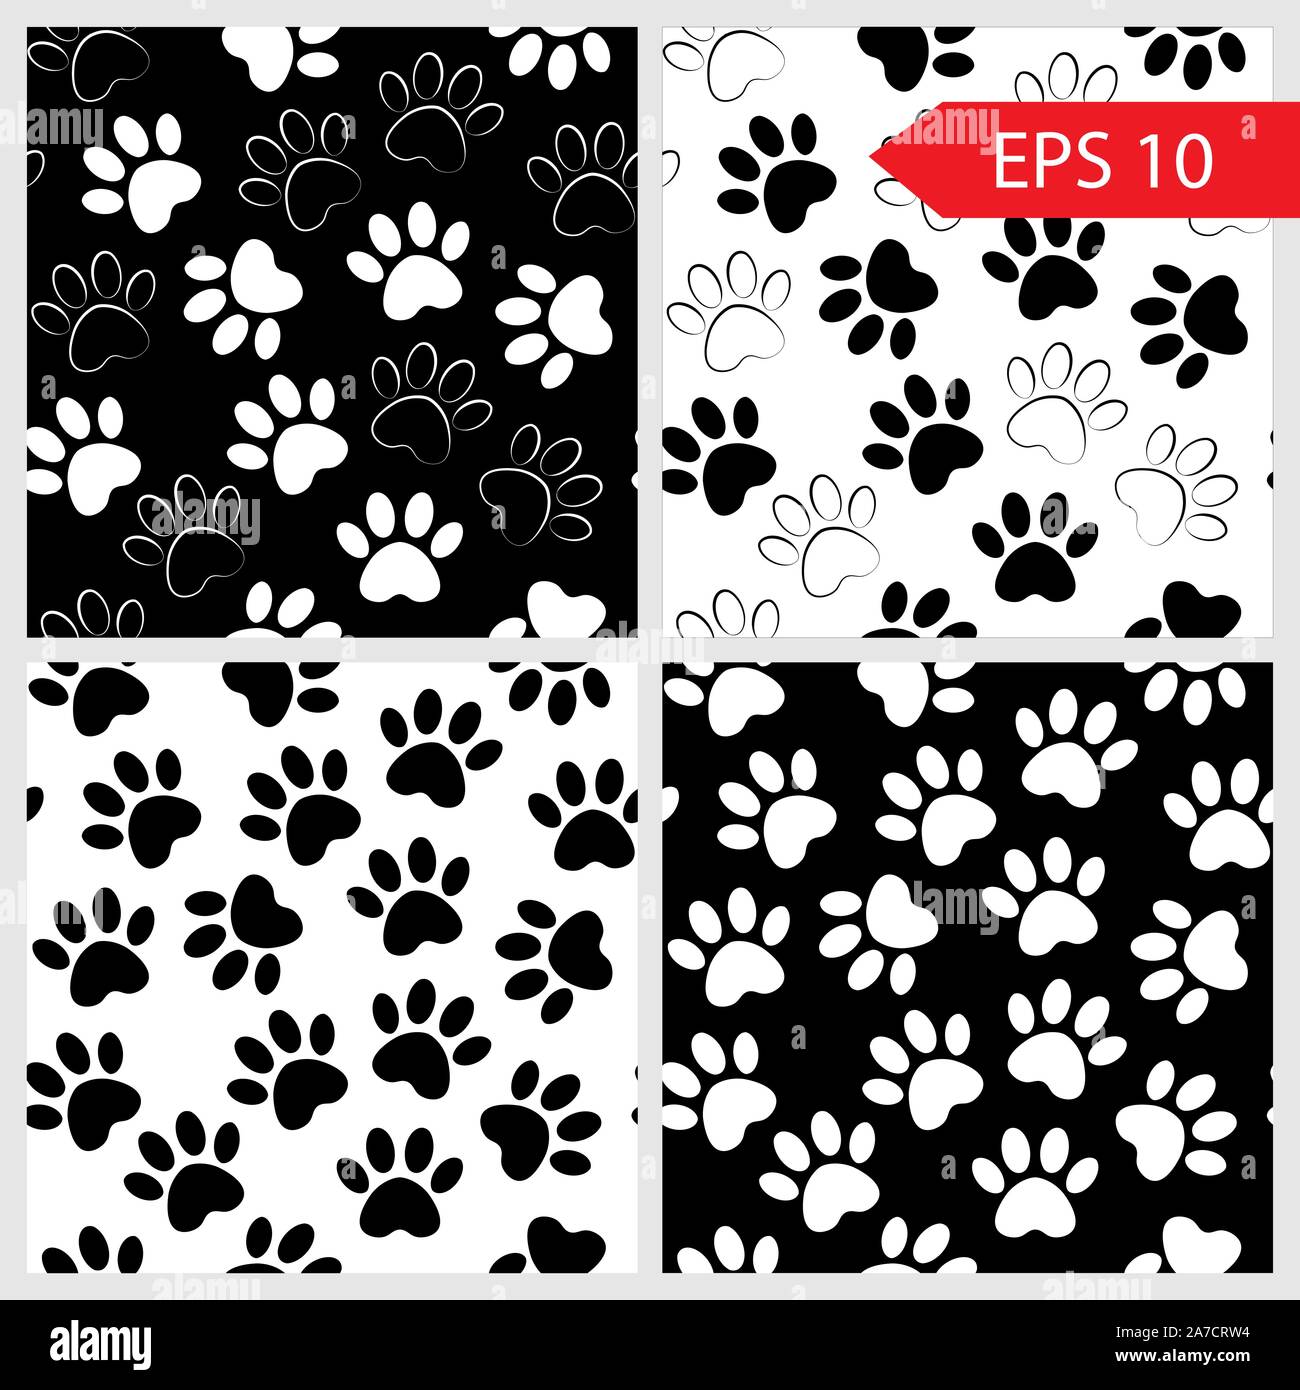 Fascinating cute patterns black and white Cute Patterns And Textures Can Be Used For Printing Onto Fabric Web Page Background Paper Set Of Black White Vector Backgrounds With Paw Pri Stock Image Art